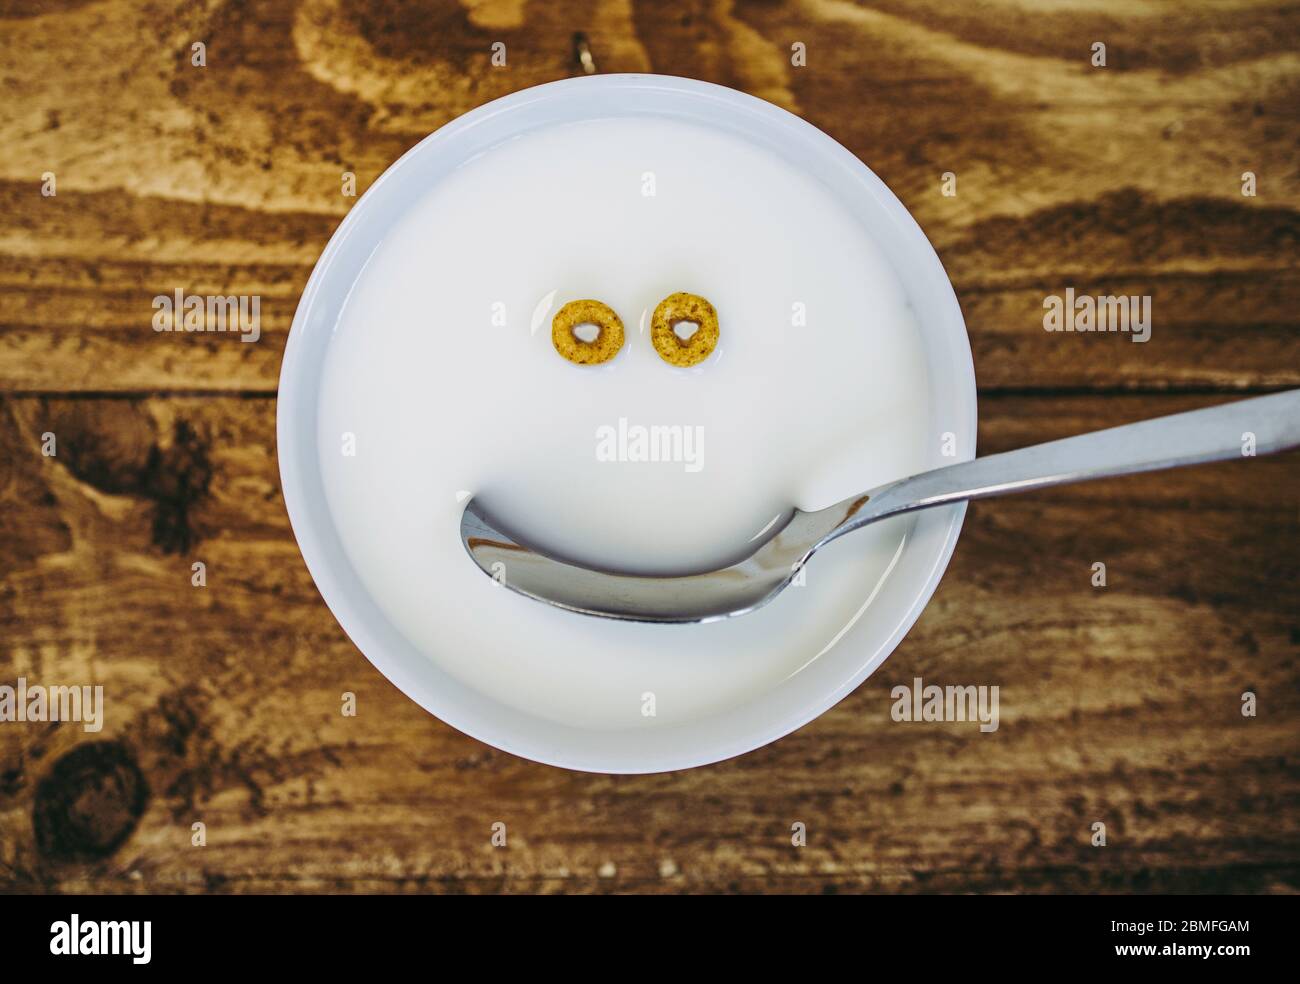 A bowl with just two pieces of round cereal left and a spoon a creating the appearance of a face in the milk Stock Photo